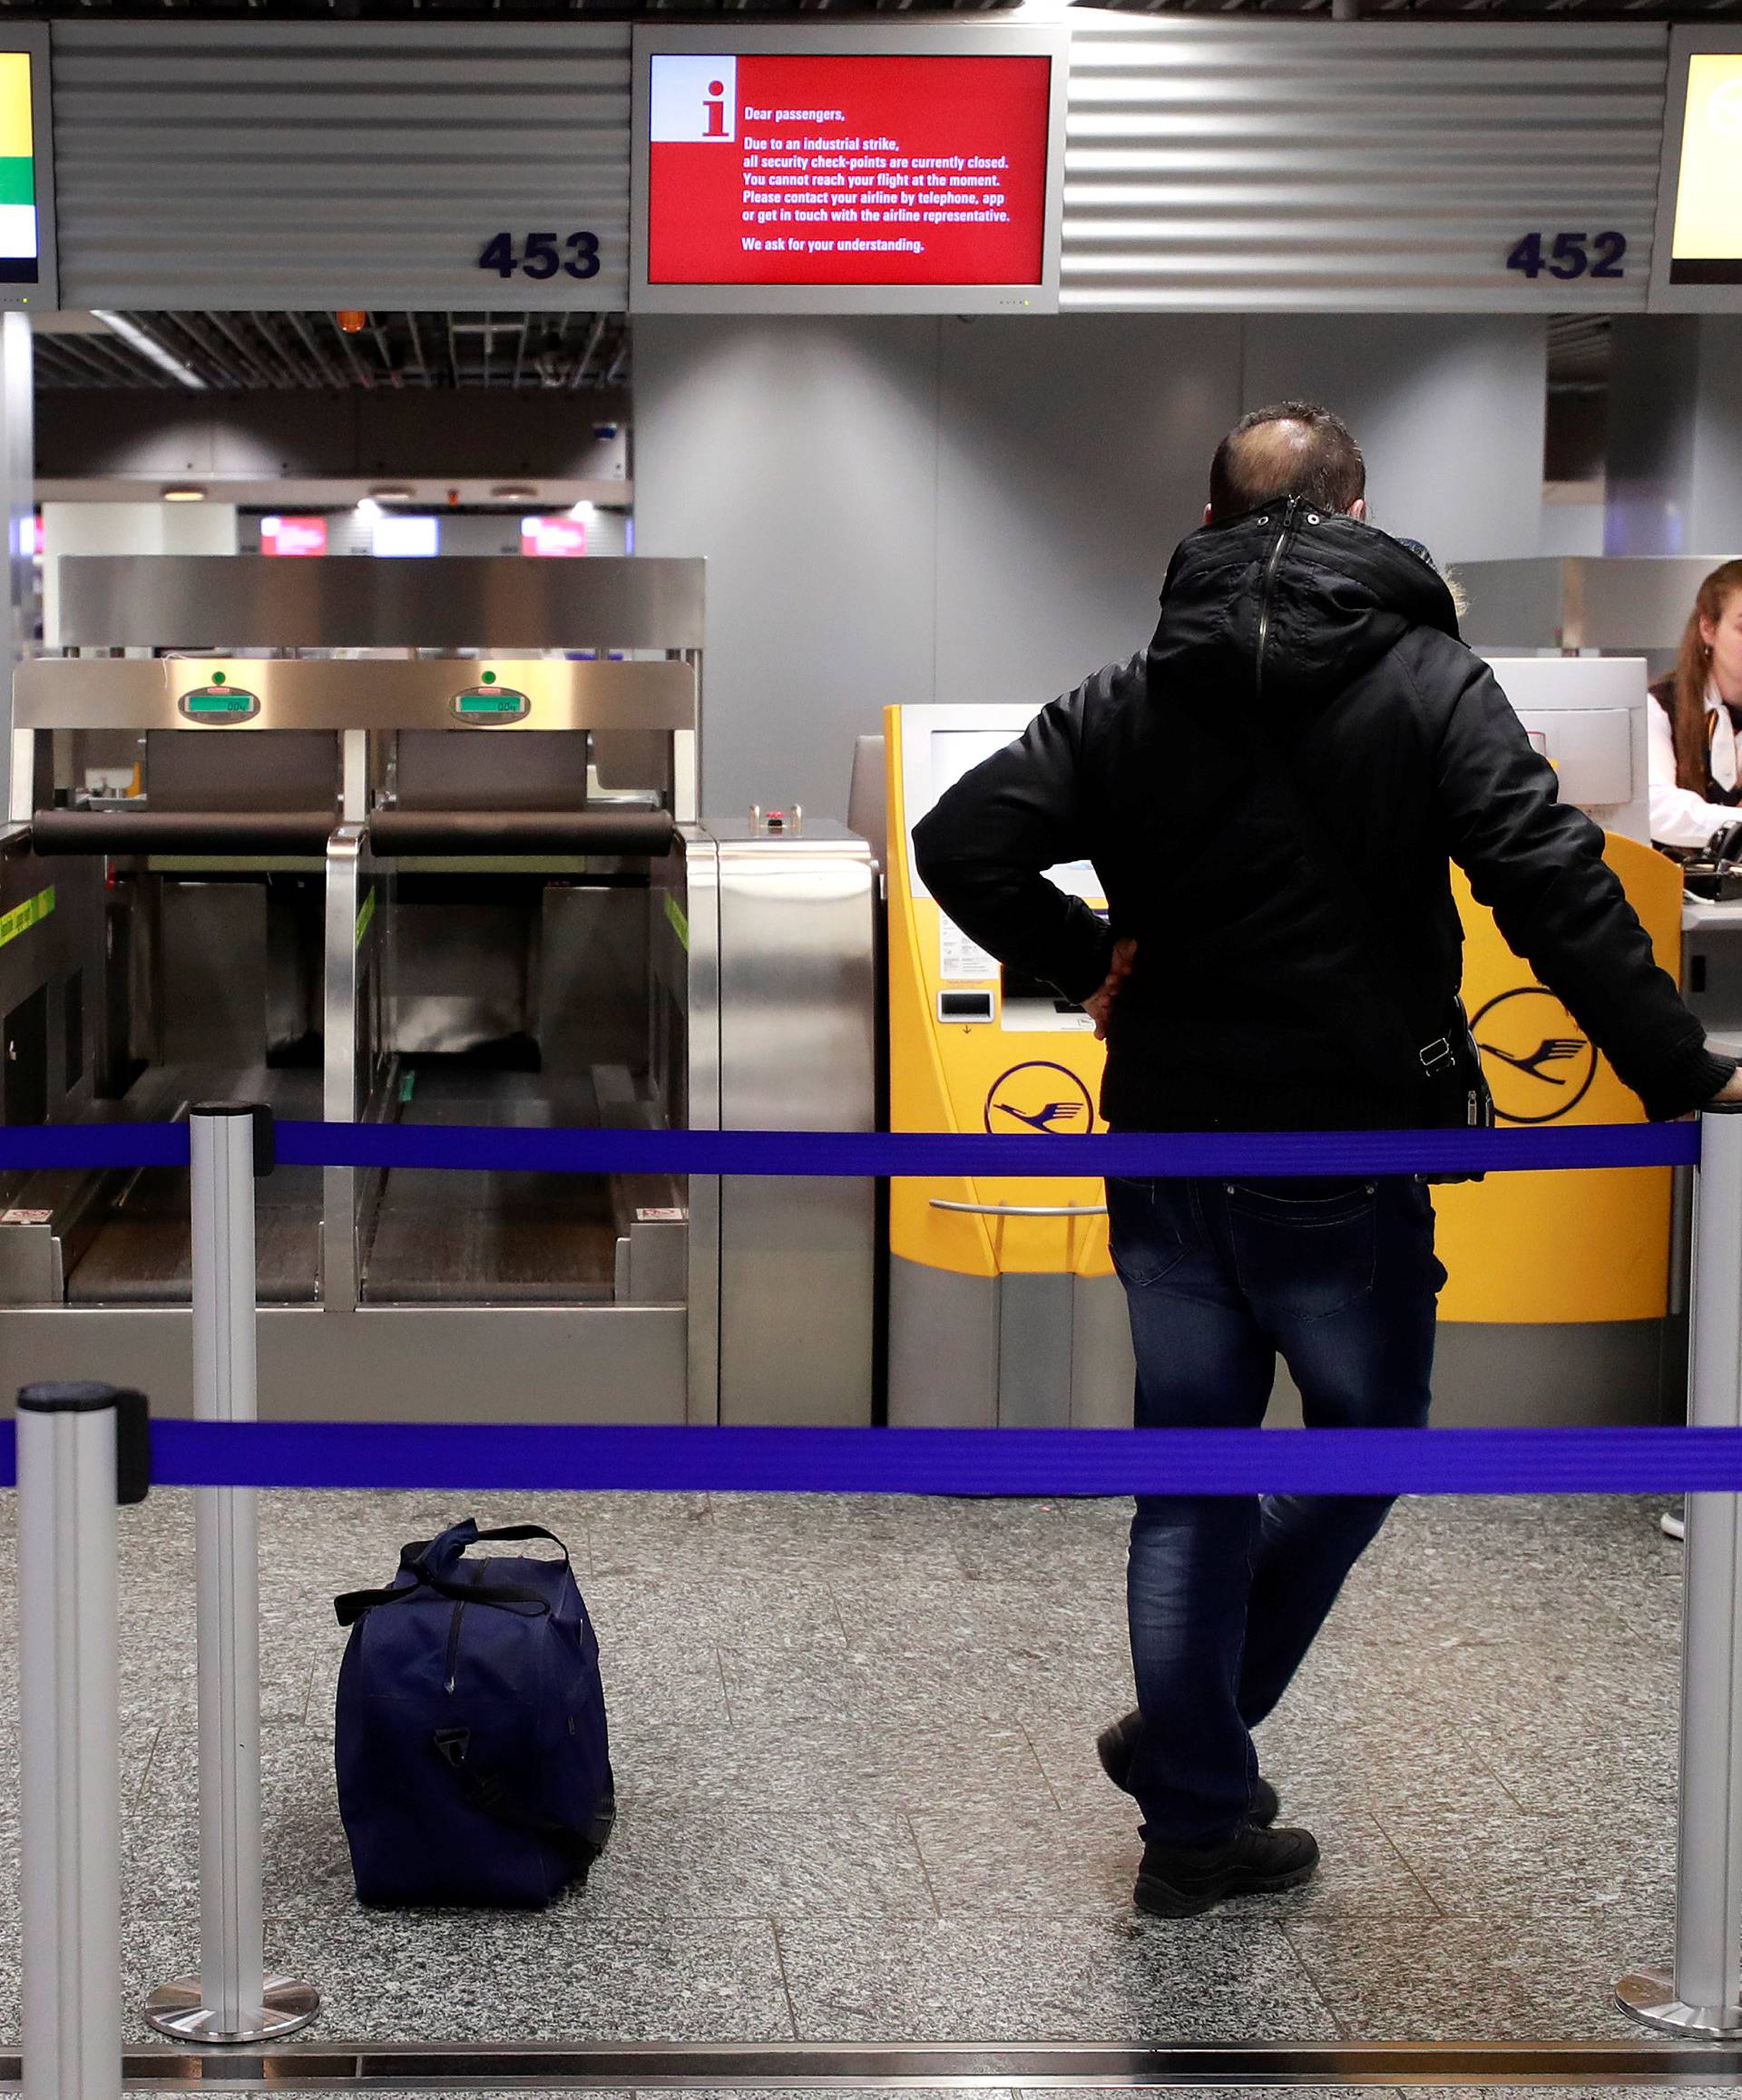 Stranded passenger get information at a check-in desk of German airline Lufthansa during a strike of security personnel over higher wages at Germany's largest airport in Frankfurt